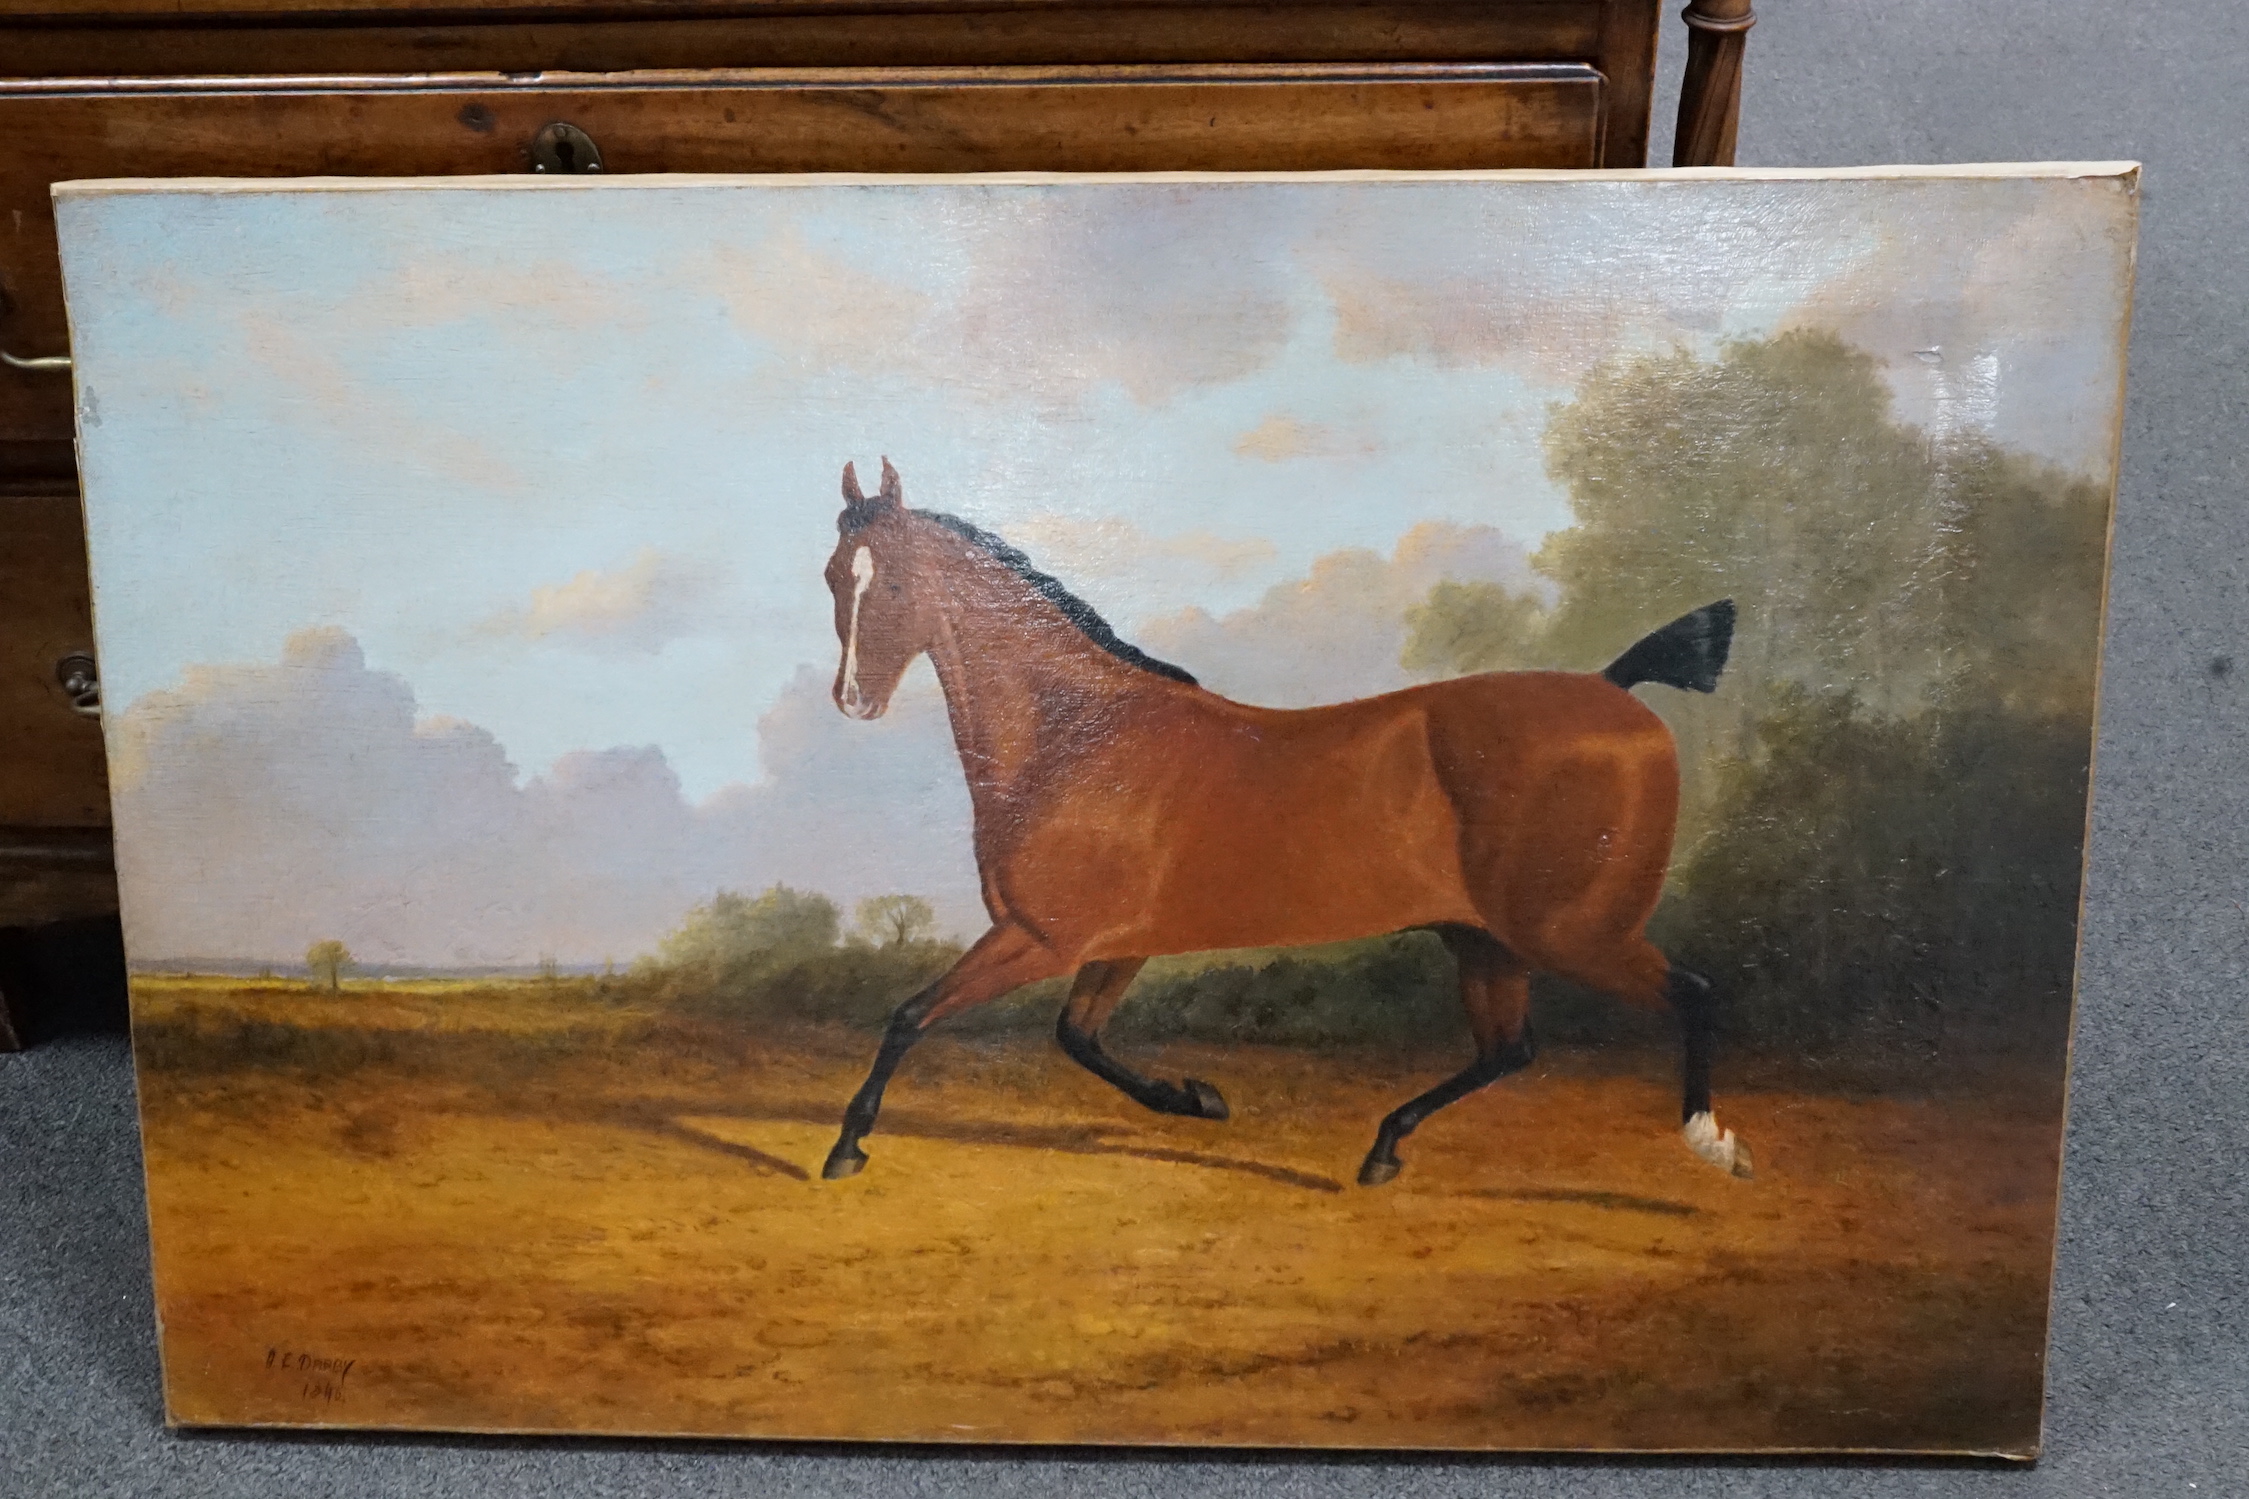 A.E. Darby (19th C.), oil on canvas, Chestnut horse in a landscape, signed and dated 1846, 50 x 76cm, unframed